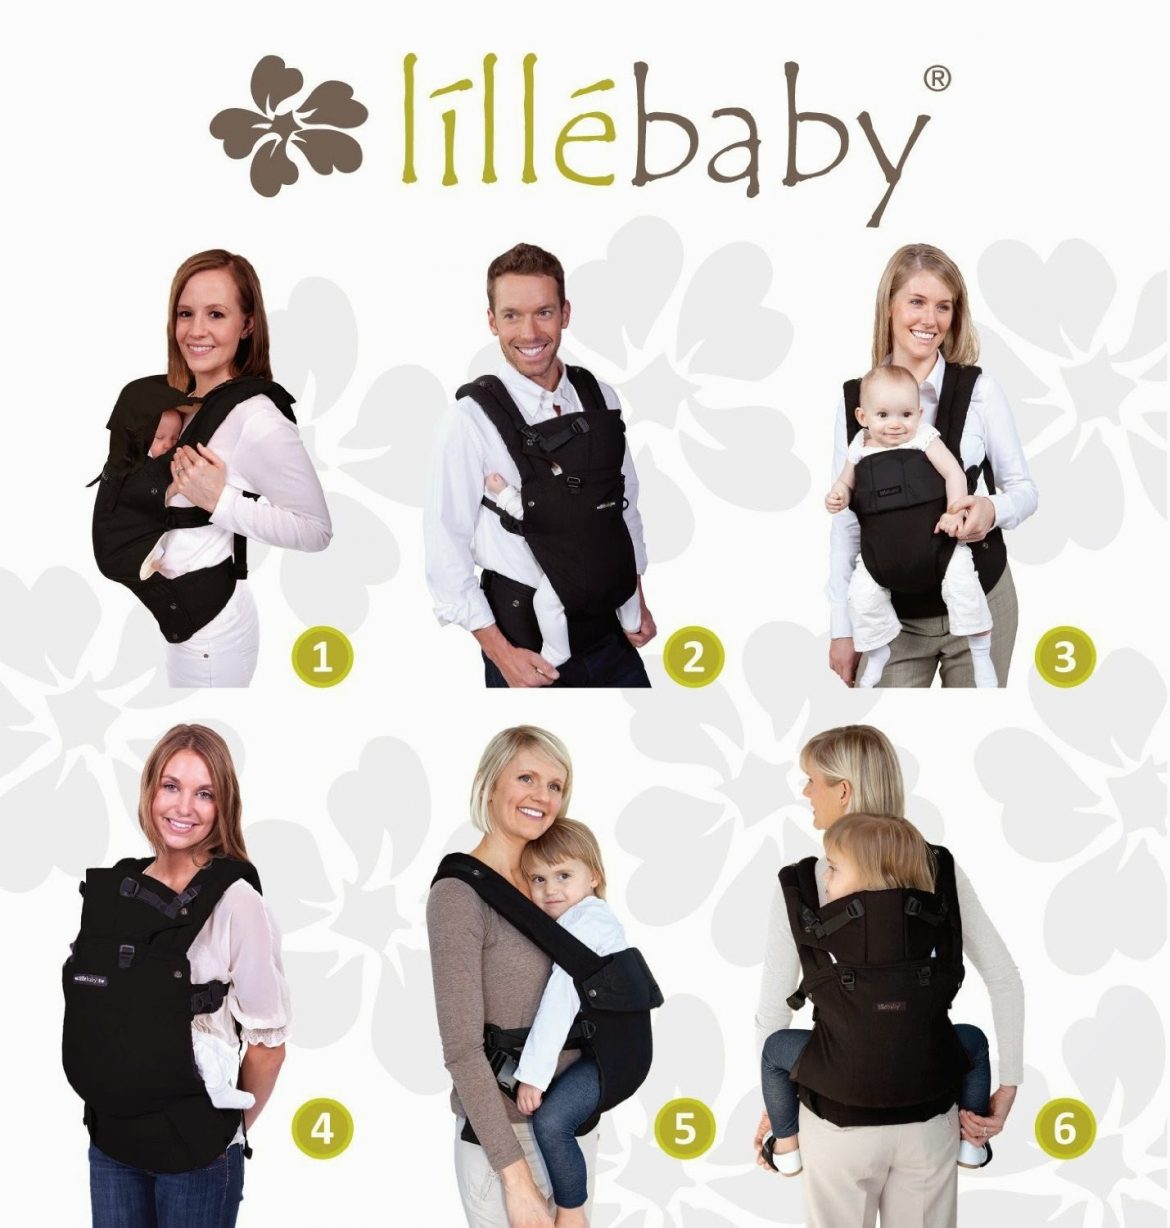 lillebaby complete all seasons carrier